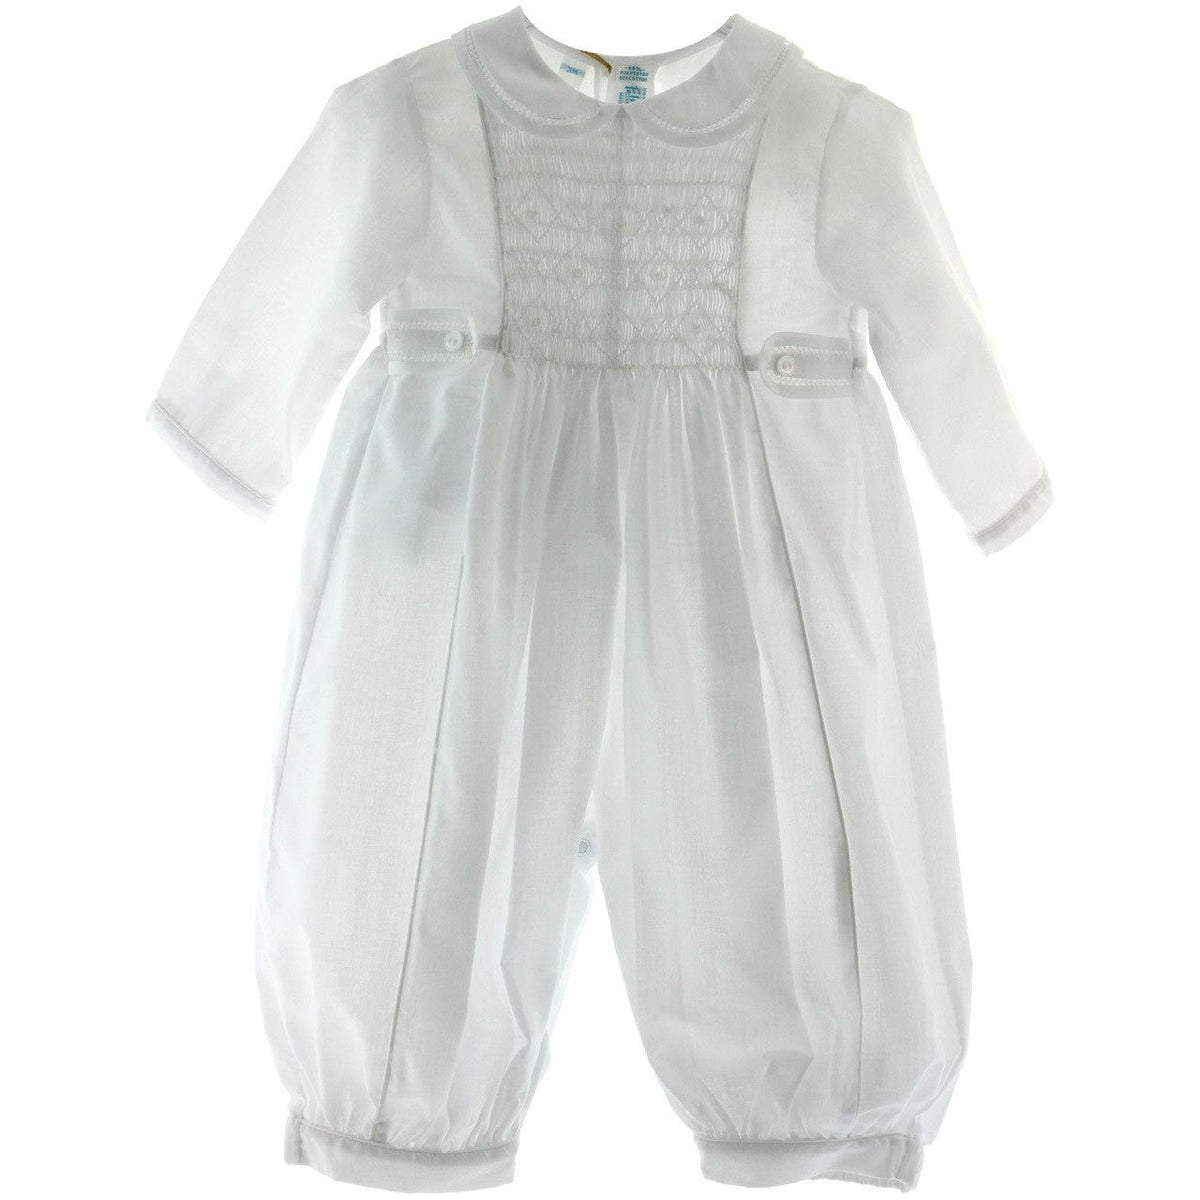 Christening Romper for Boy with Peter Pan Collar